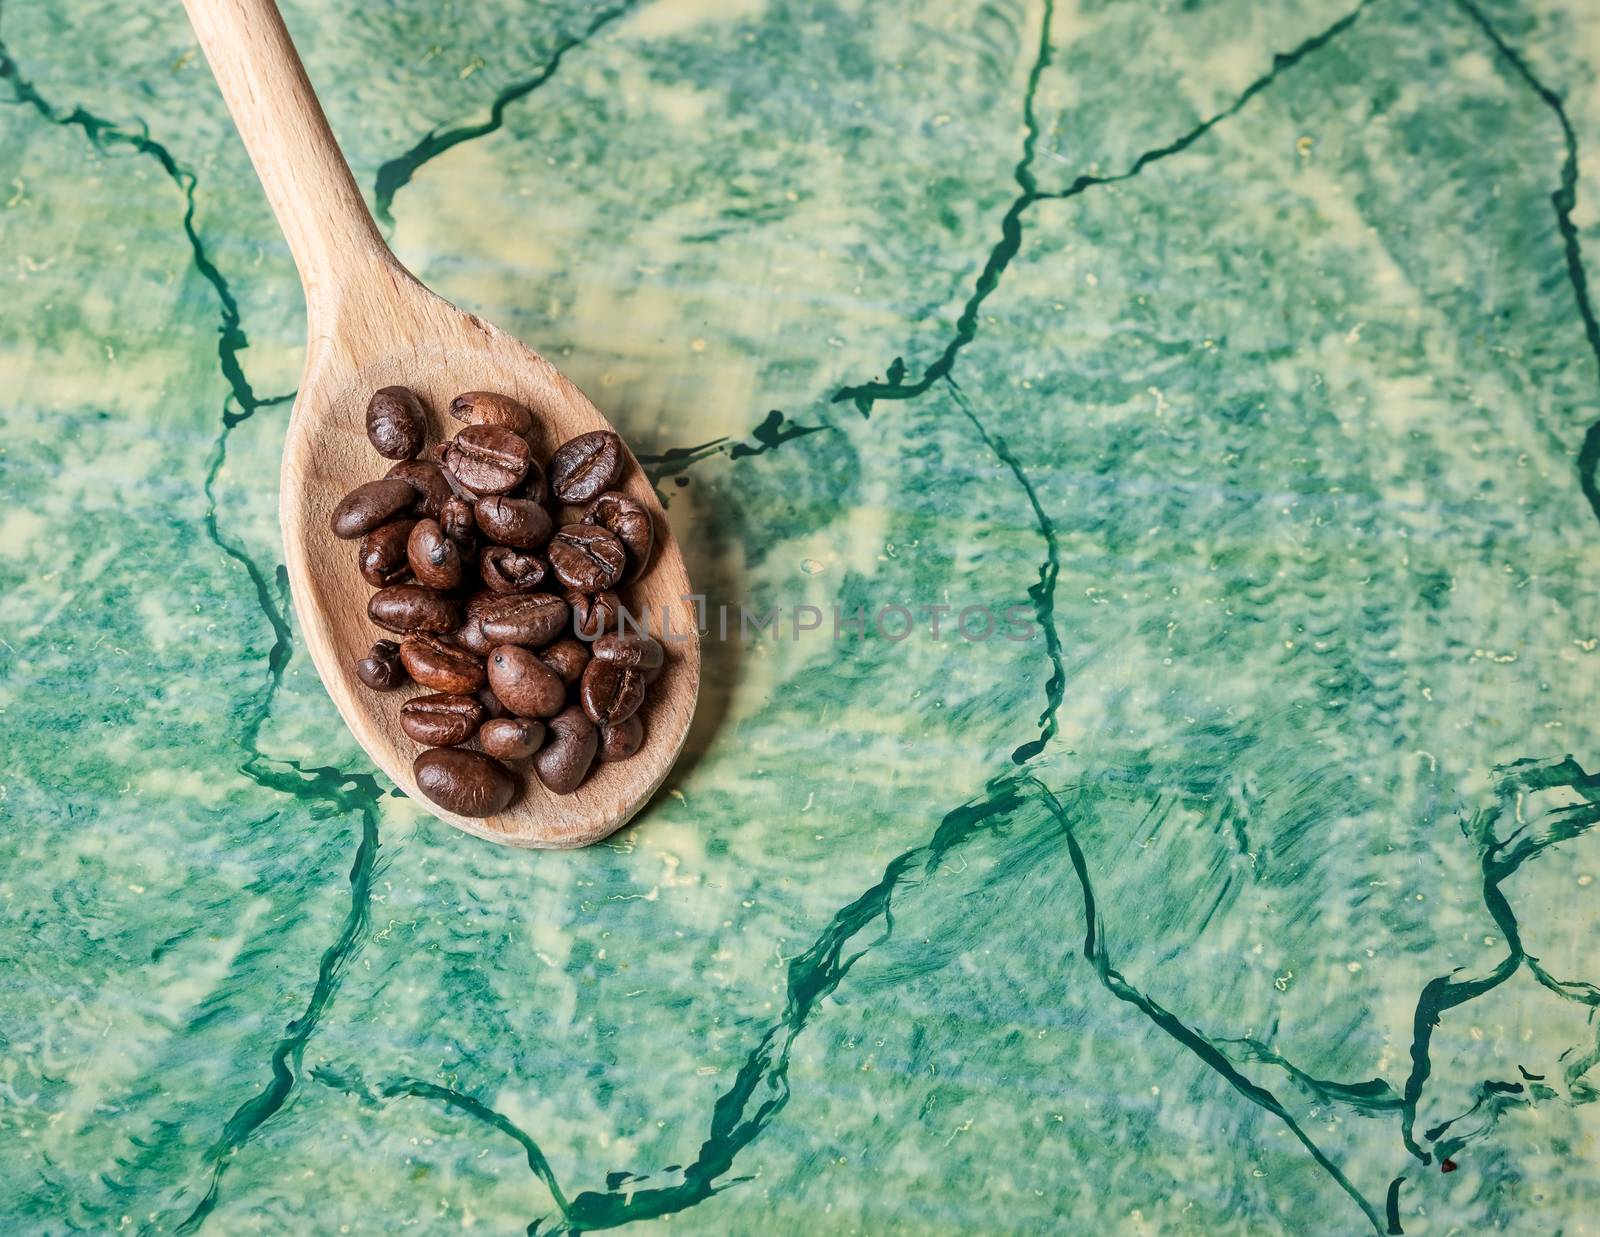 Wooden spoon with coffee beans on top, background green surface.